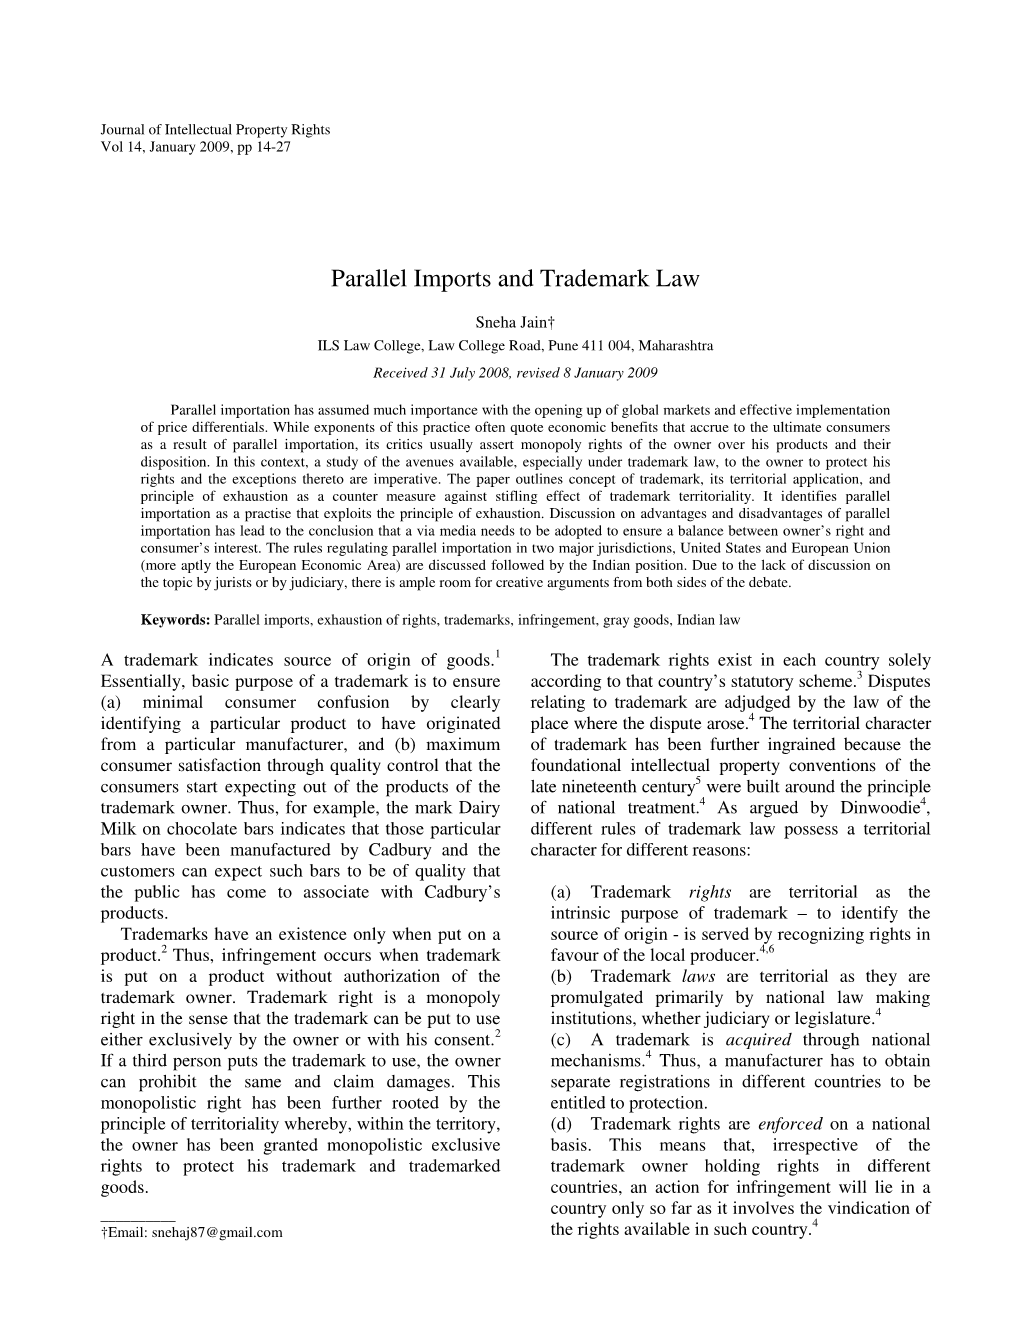 Parallel Imports and Trademark Law